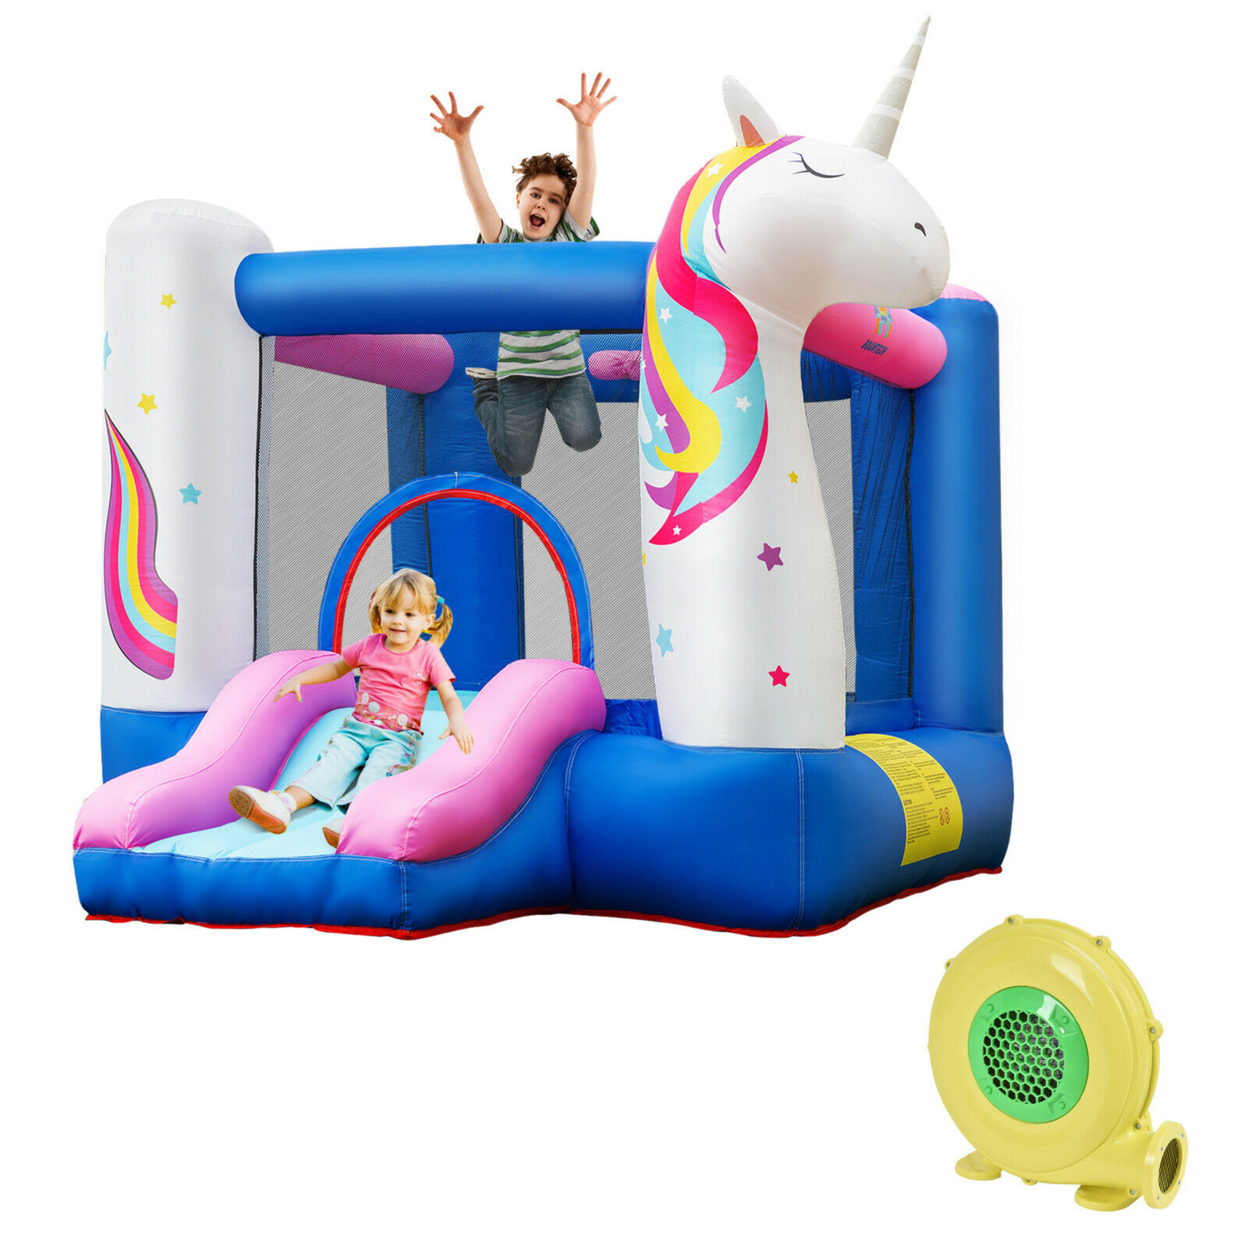 Slide Bouncer Inflatable Jumping Castle Basketball Game W/ 480W Blower